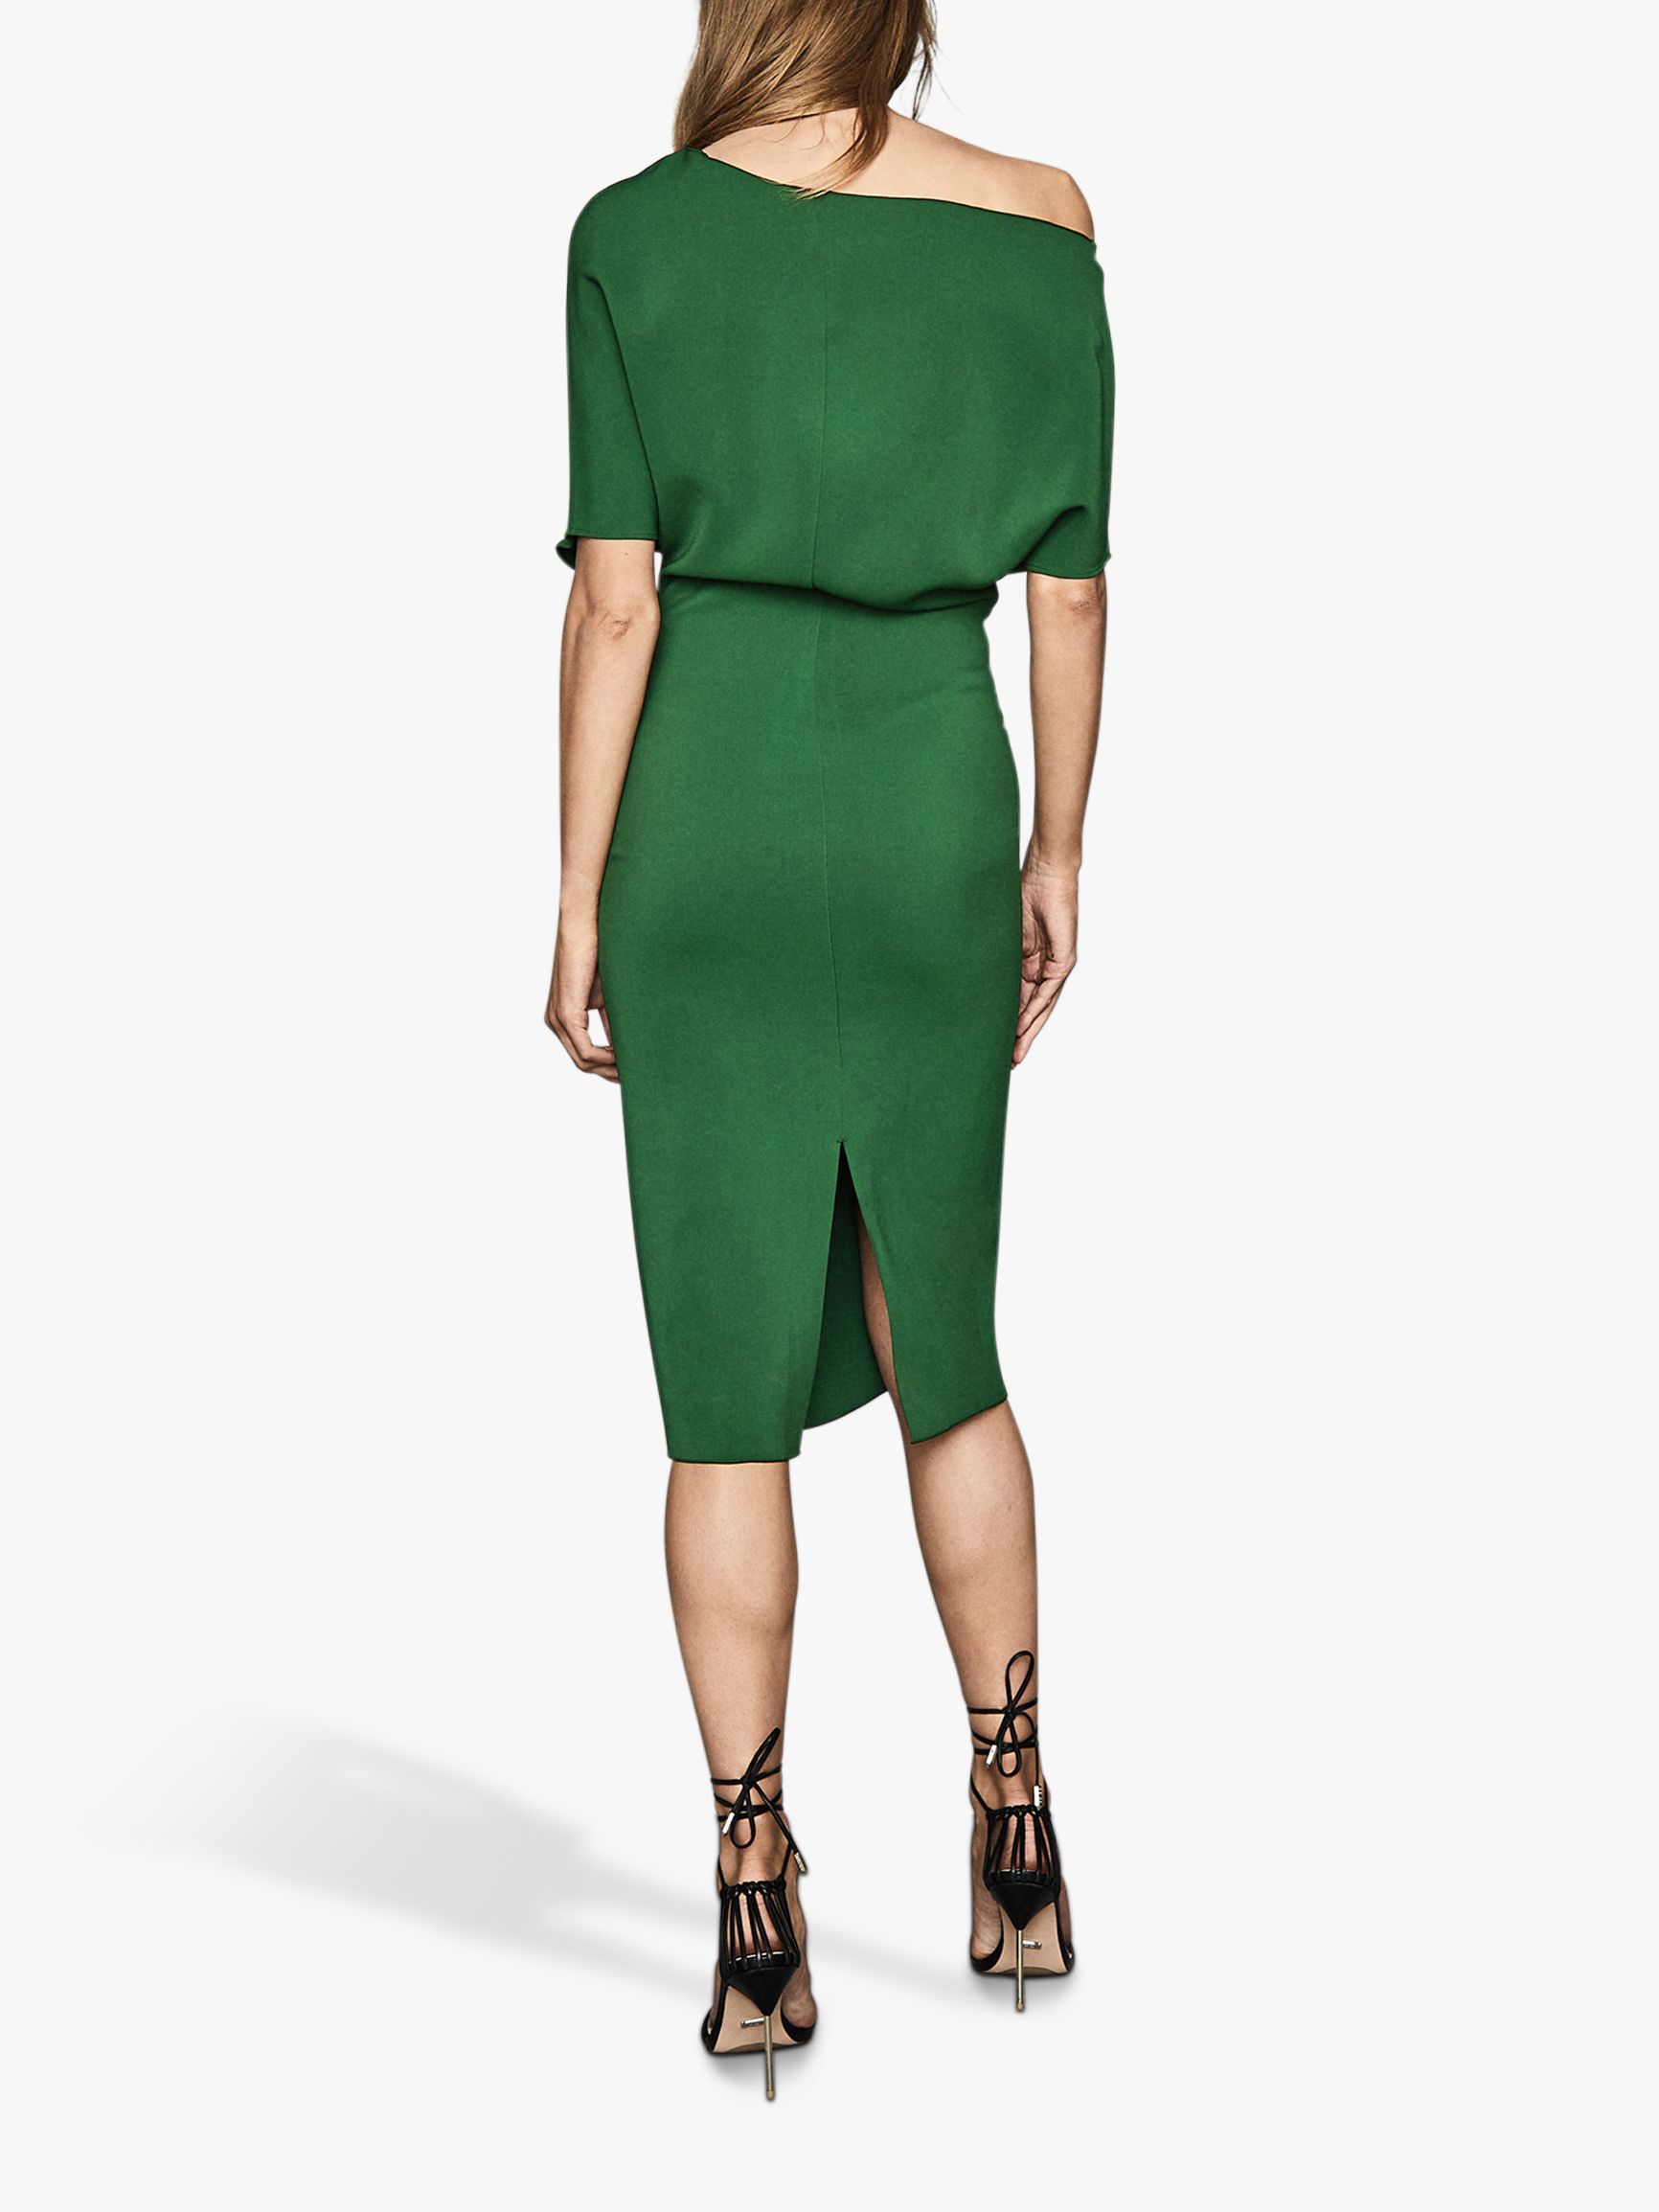 Northern reflections john lewis bodycon dresses los angeles teens